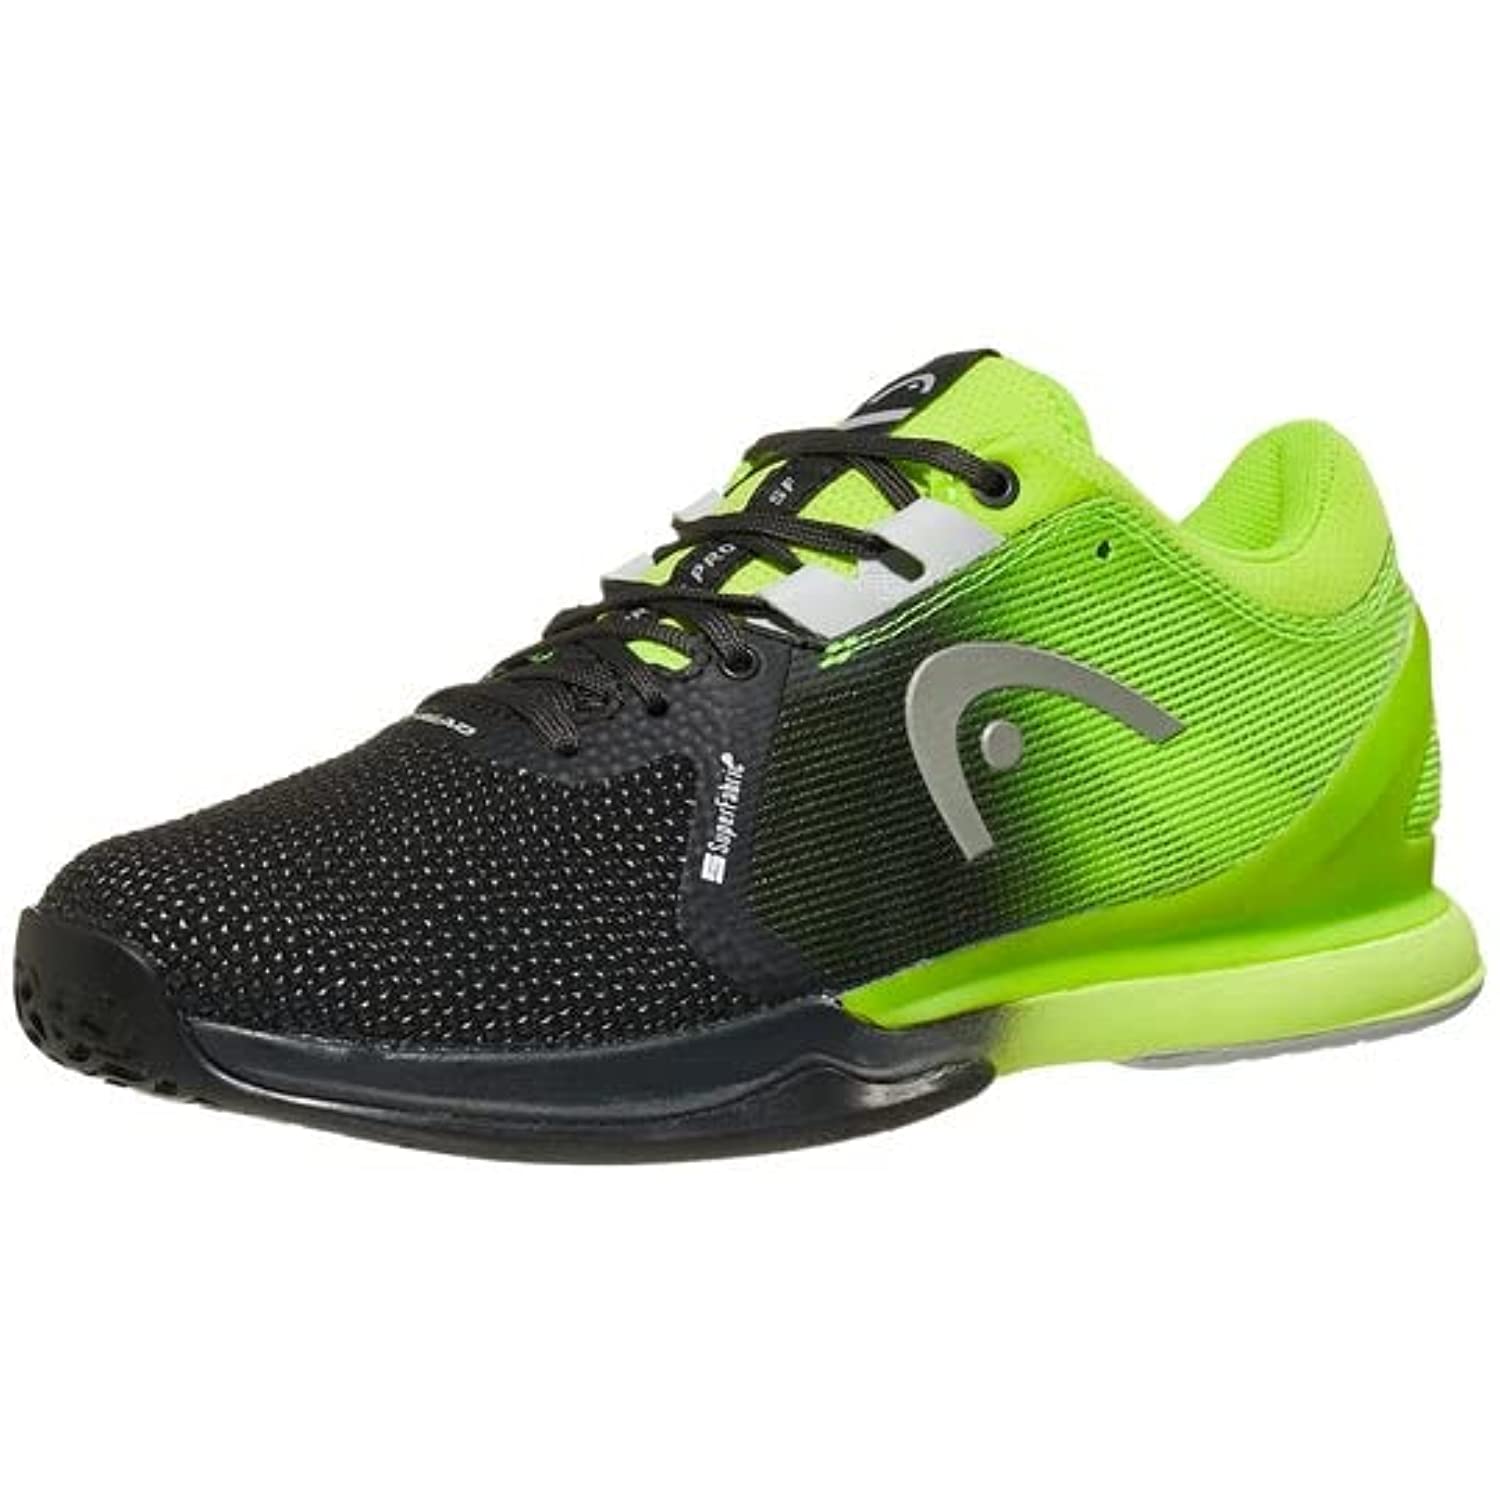 HEAD Men's Sprint Pro 3.0 SF Tennis Shoes (US, Numeric_12) Green - image 1 of 3